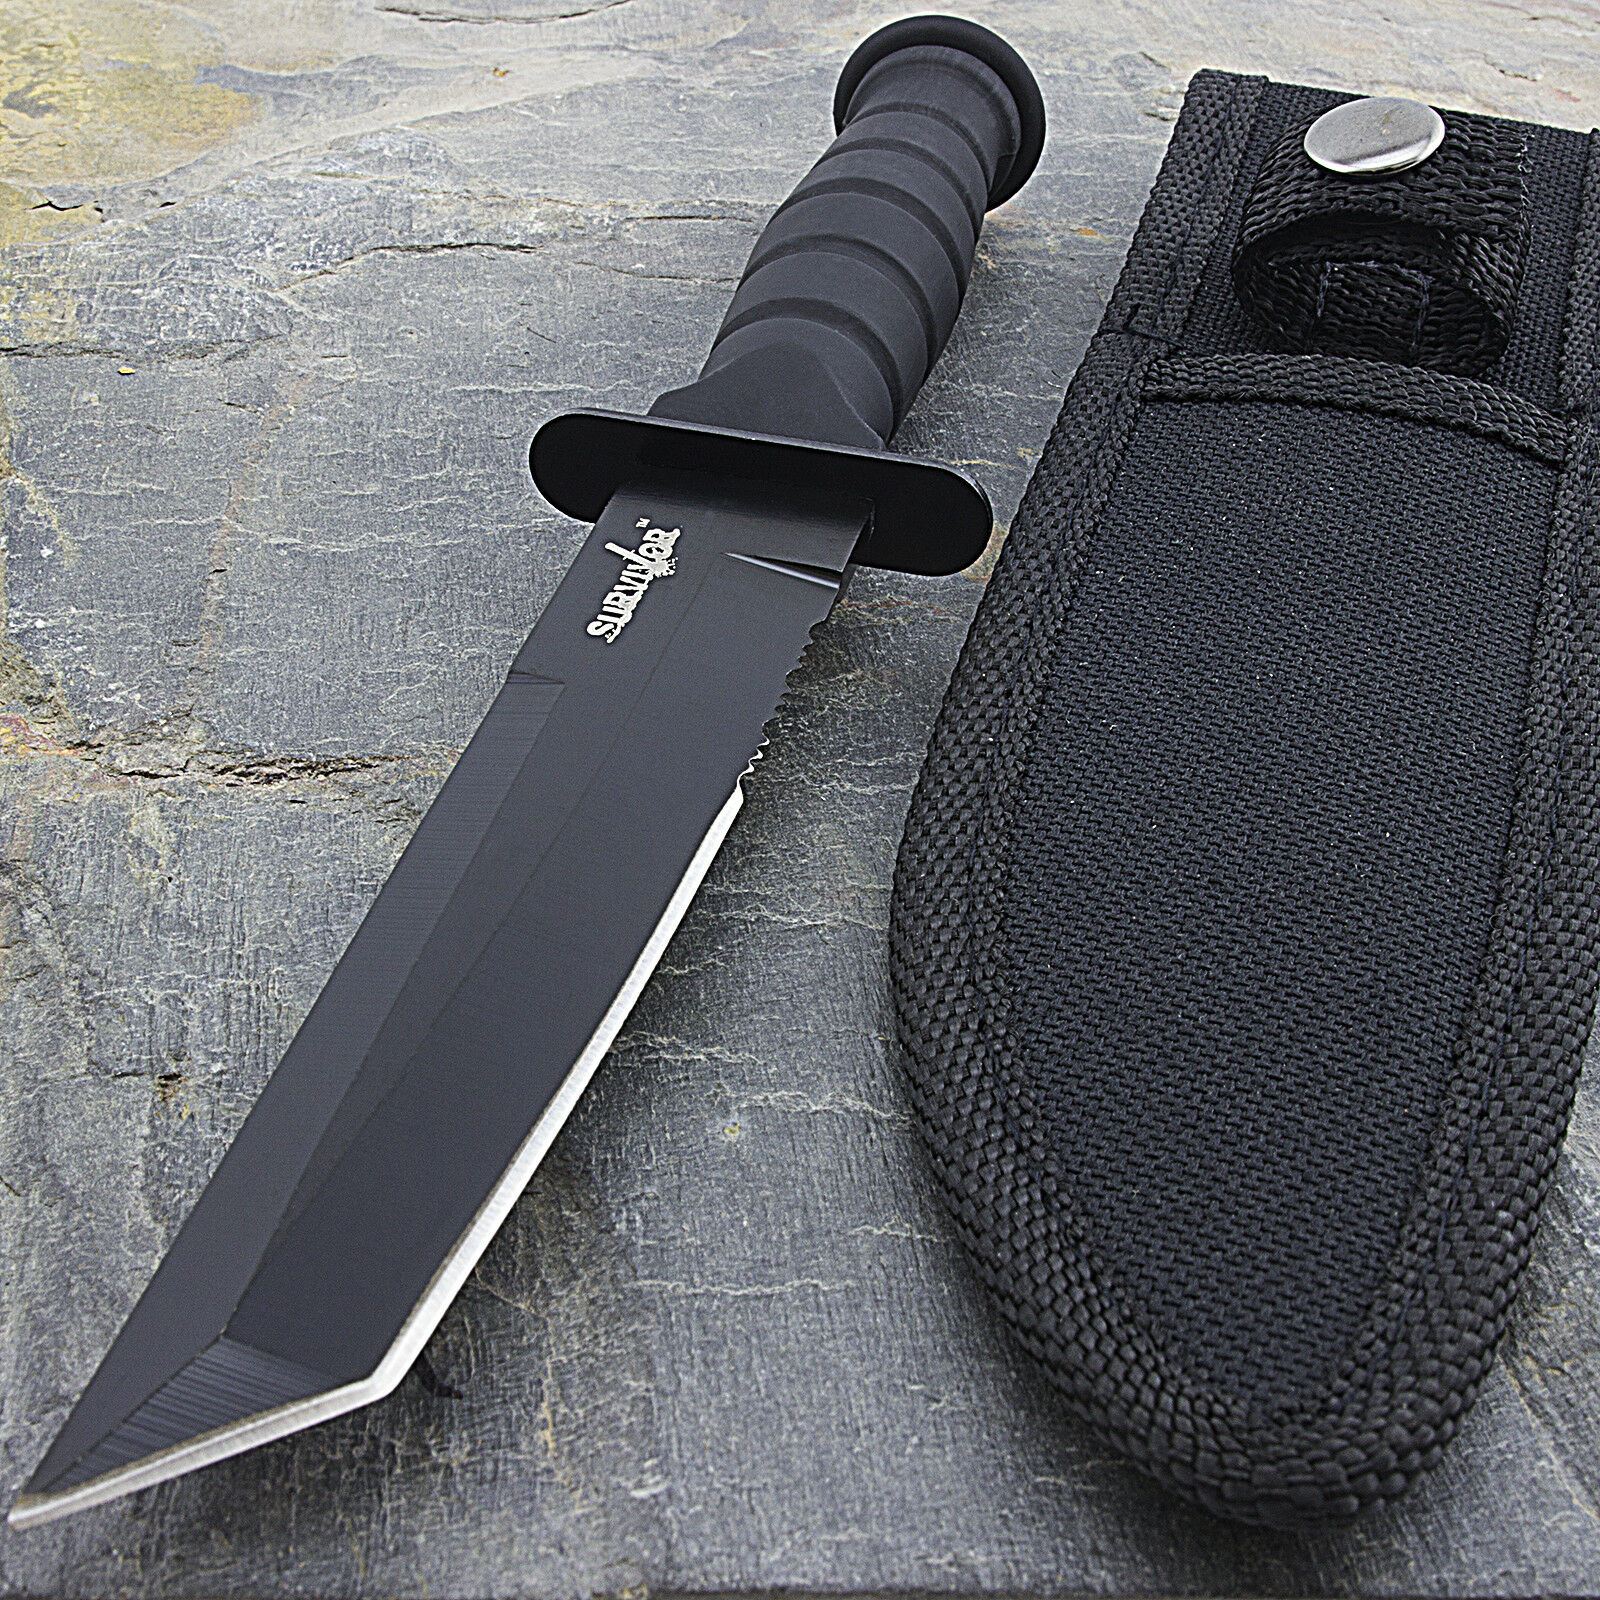 7.5" Military Tactical Tanto Combat Knife W/ Sheath Survival Hunting Fixed Blade